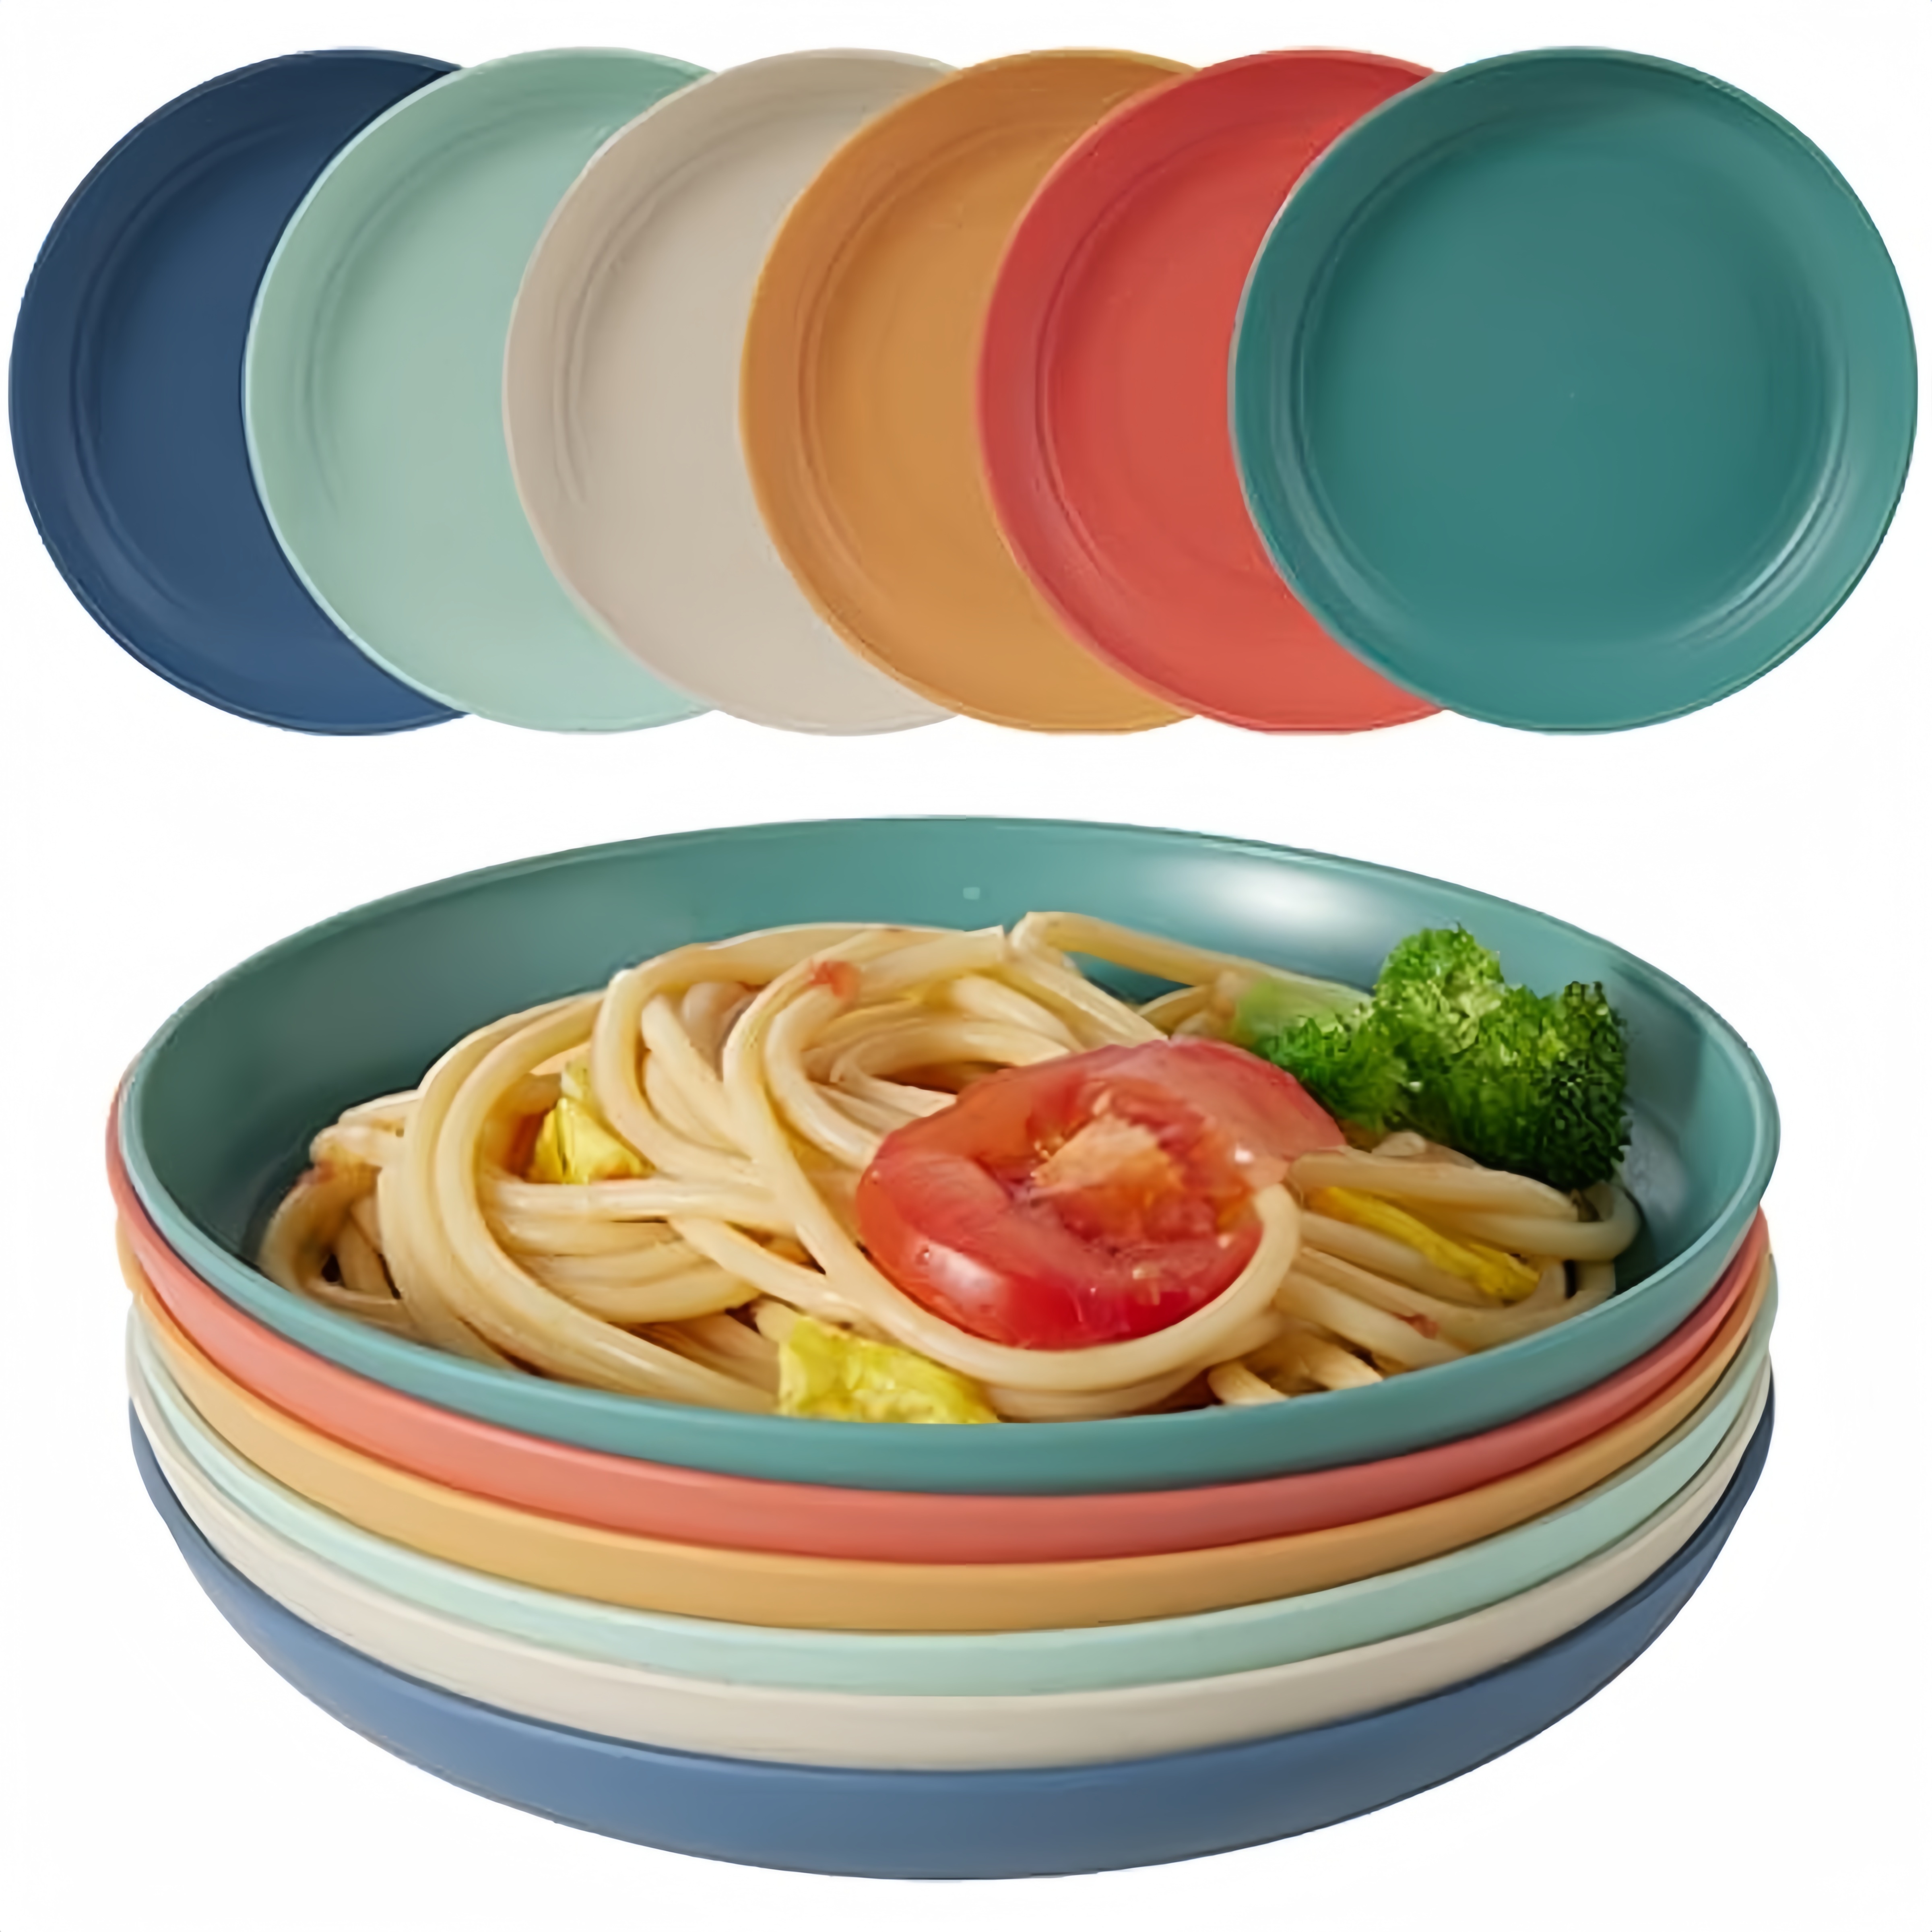 

6pcs 7.8 Inch Lightweight Plates, Unbreakable Deep Dinner Plates, Dishwasher & Microwave Safe, Pasta Plate, Fruit Dessert Plate, Bpa Free, For Home Kitchen Picnic Camping Rv, Tableware Accessories